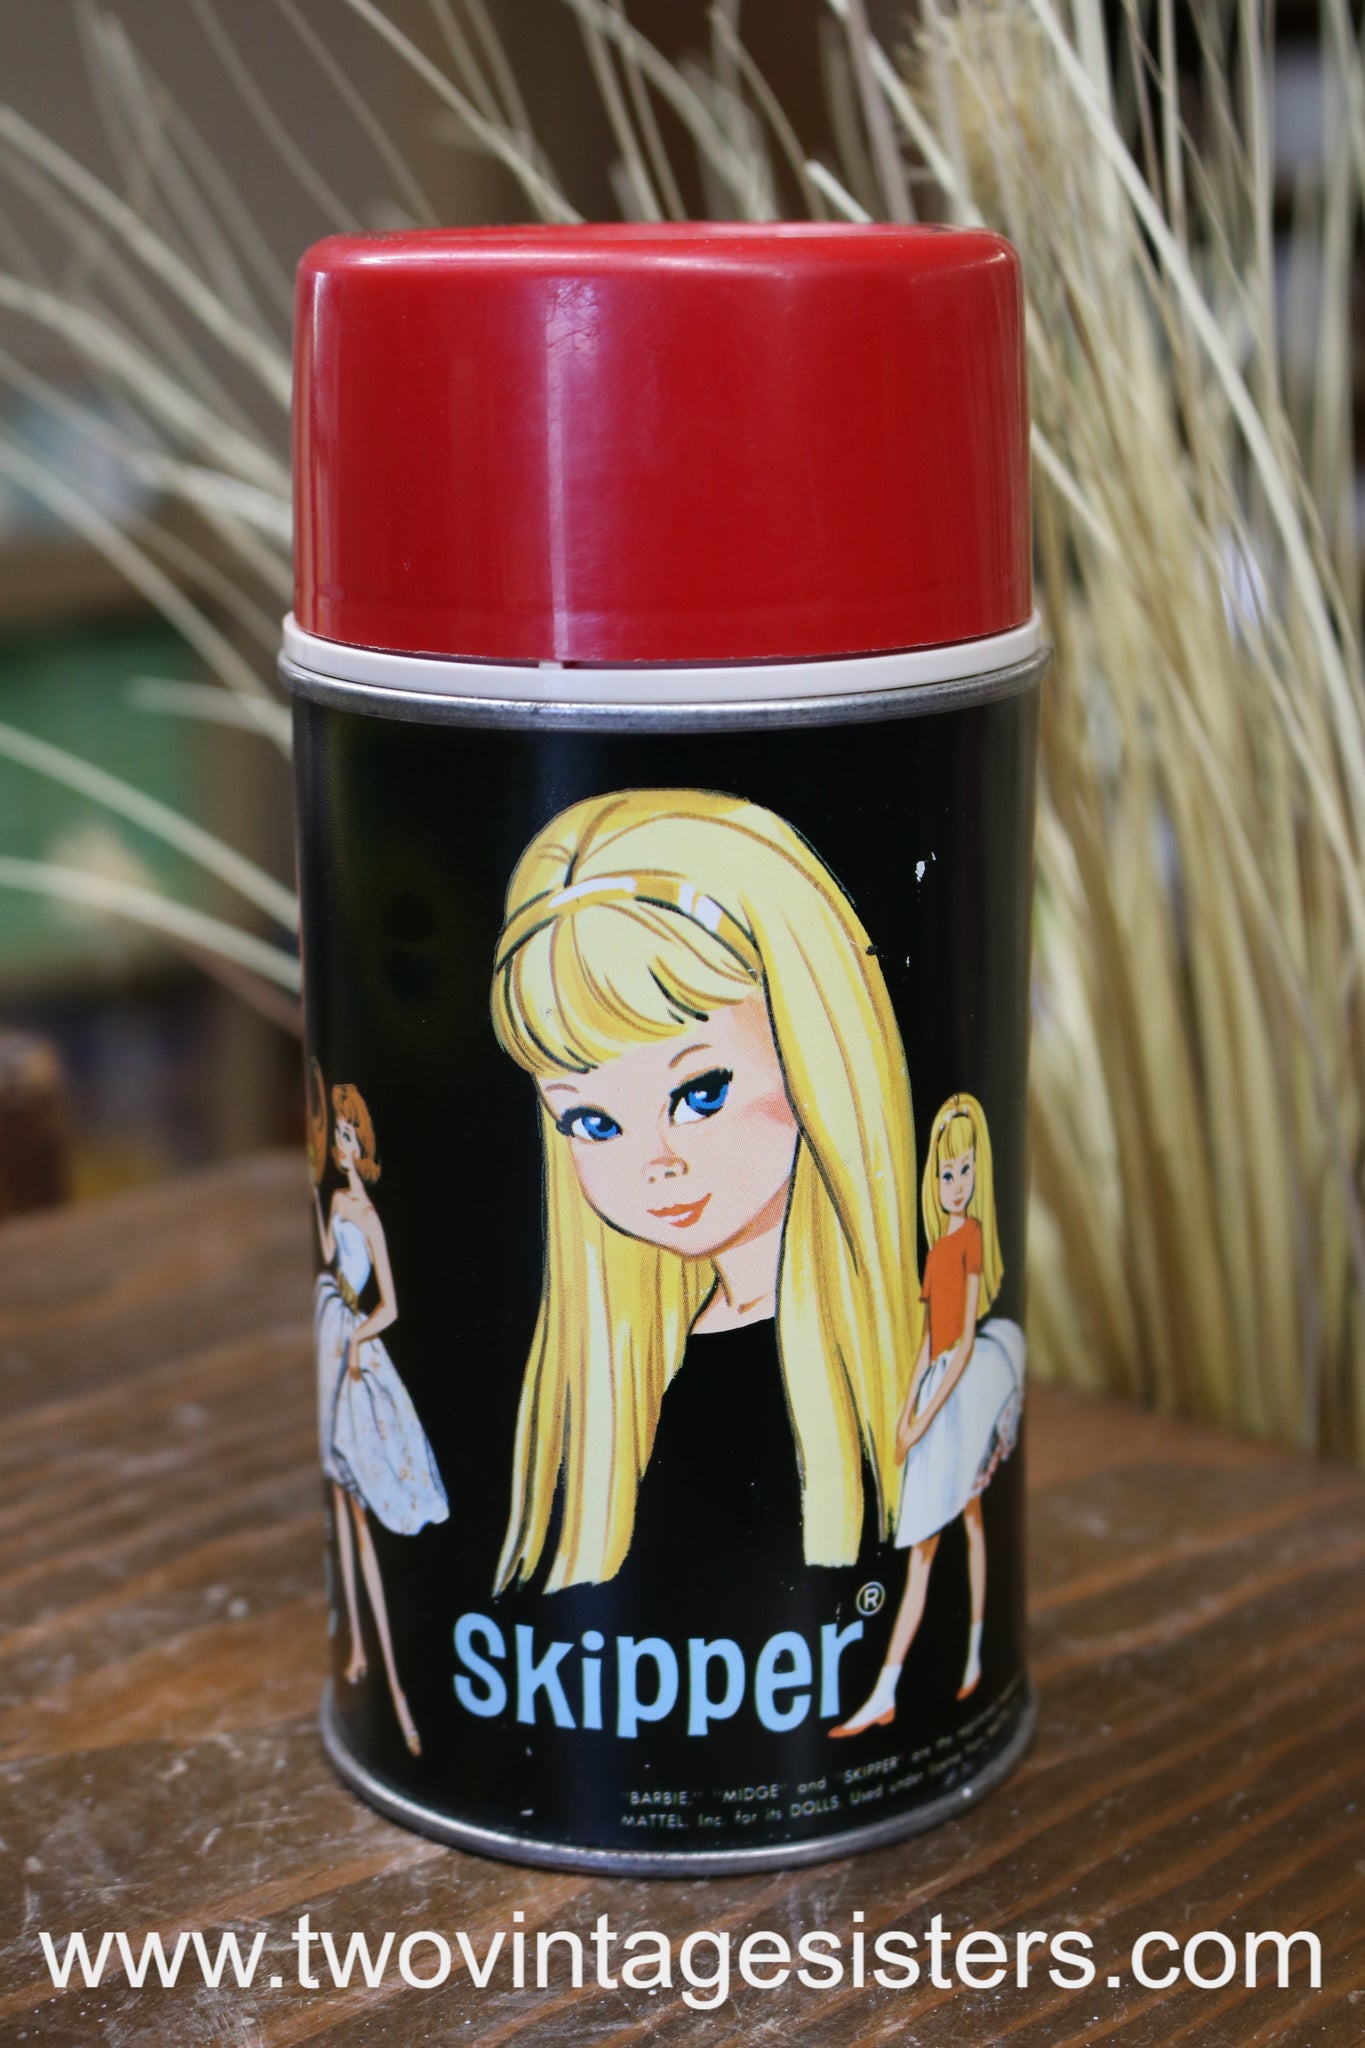 Sold at Auction: 1965 Barbie Thermos